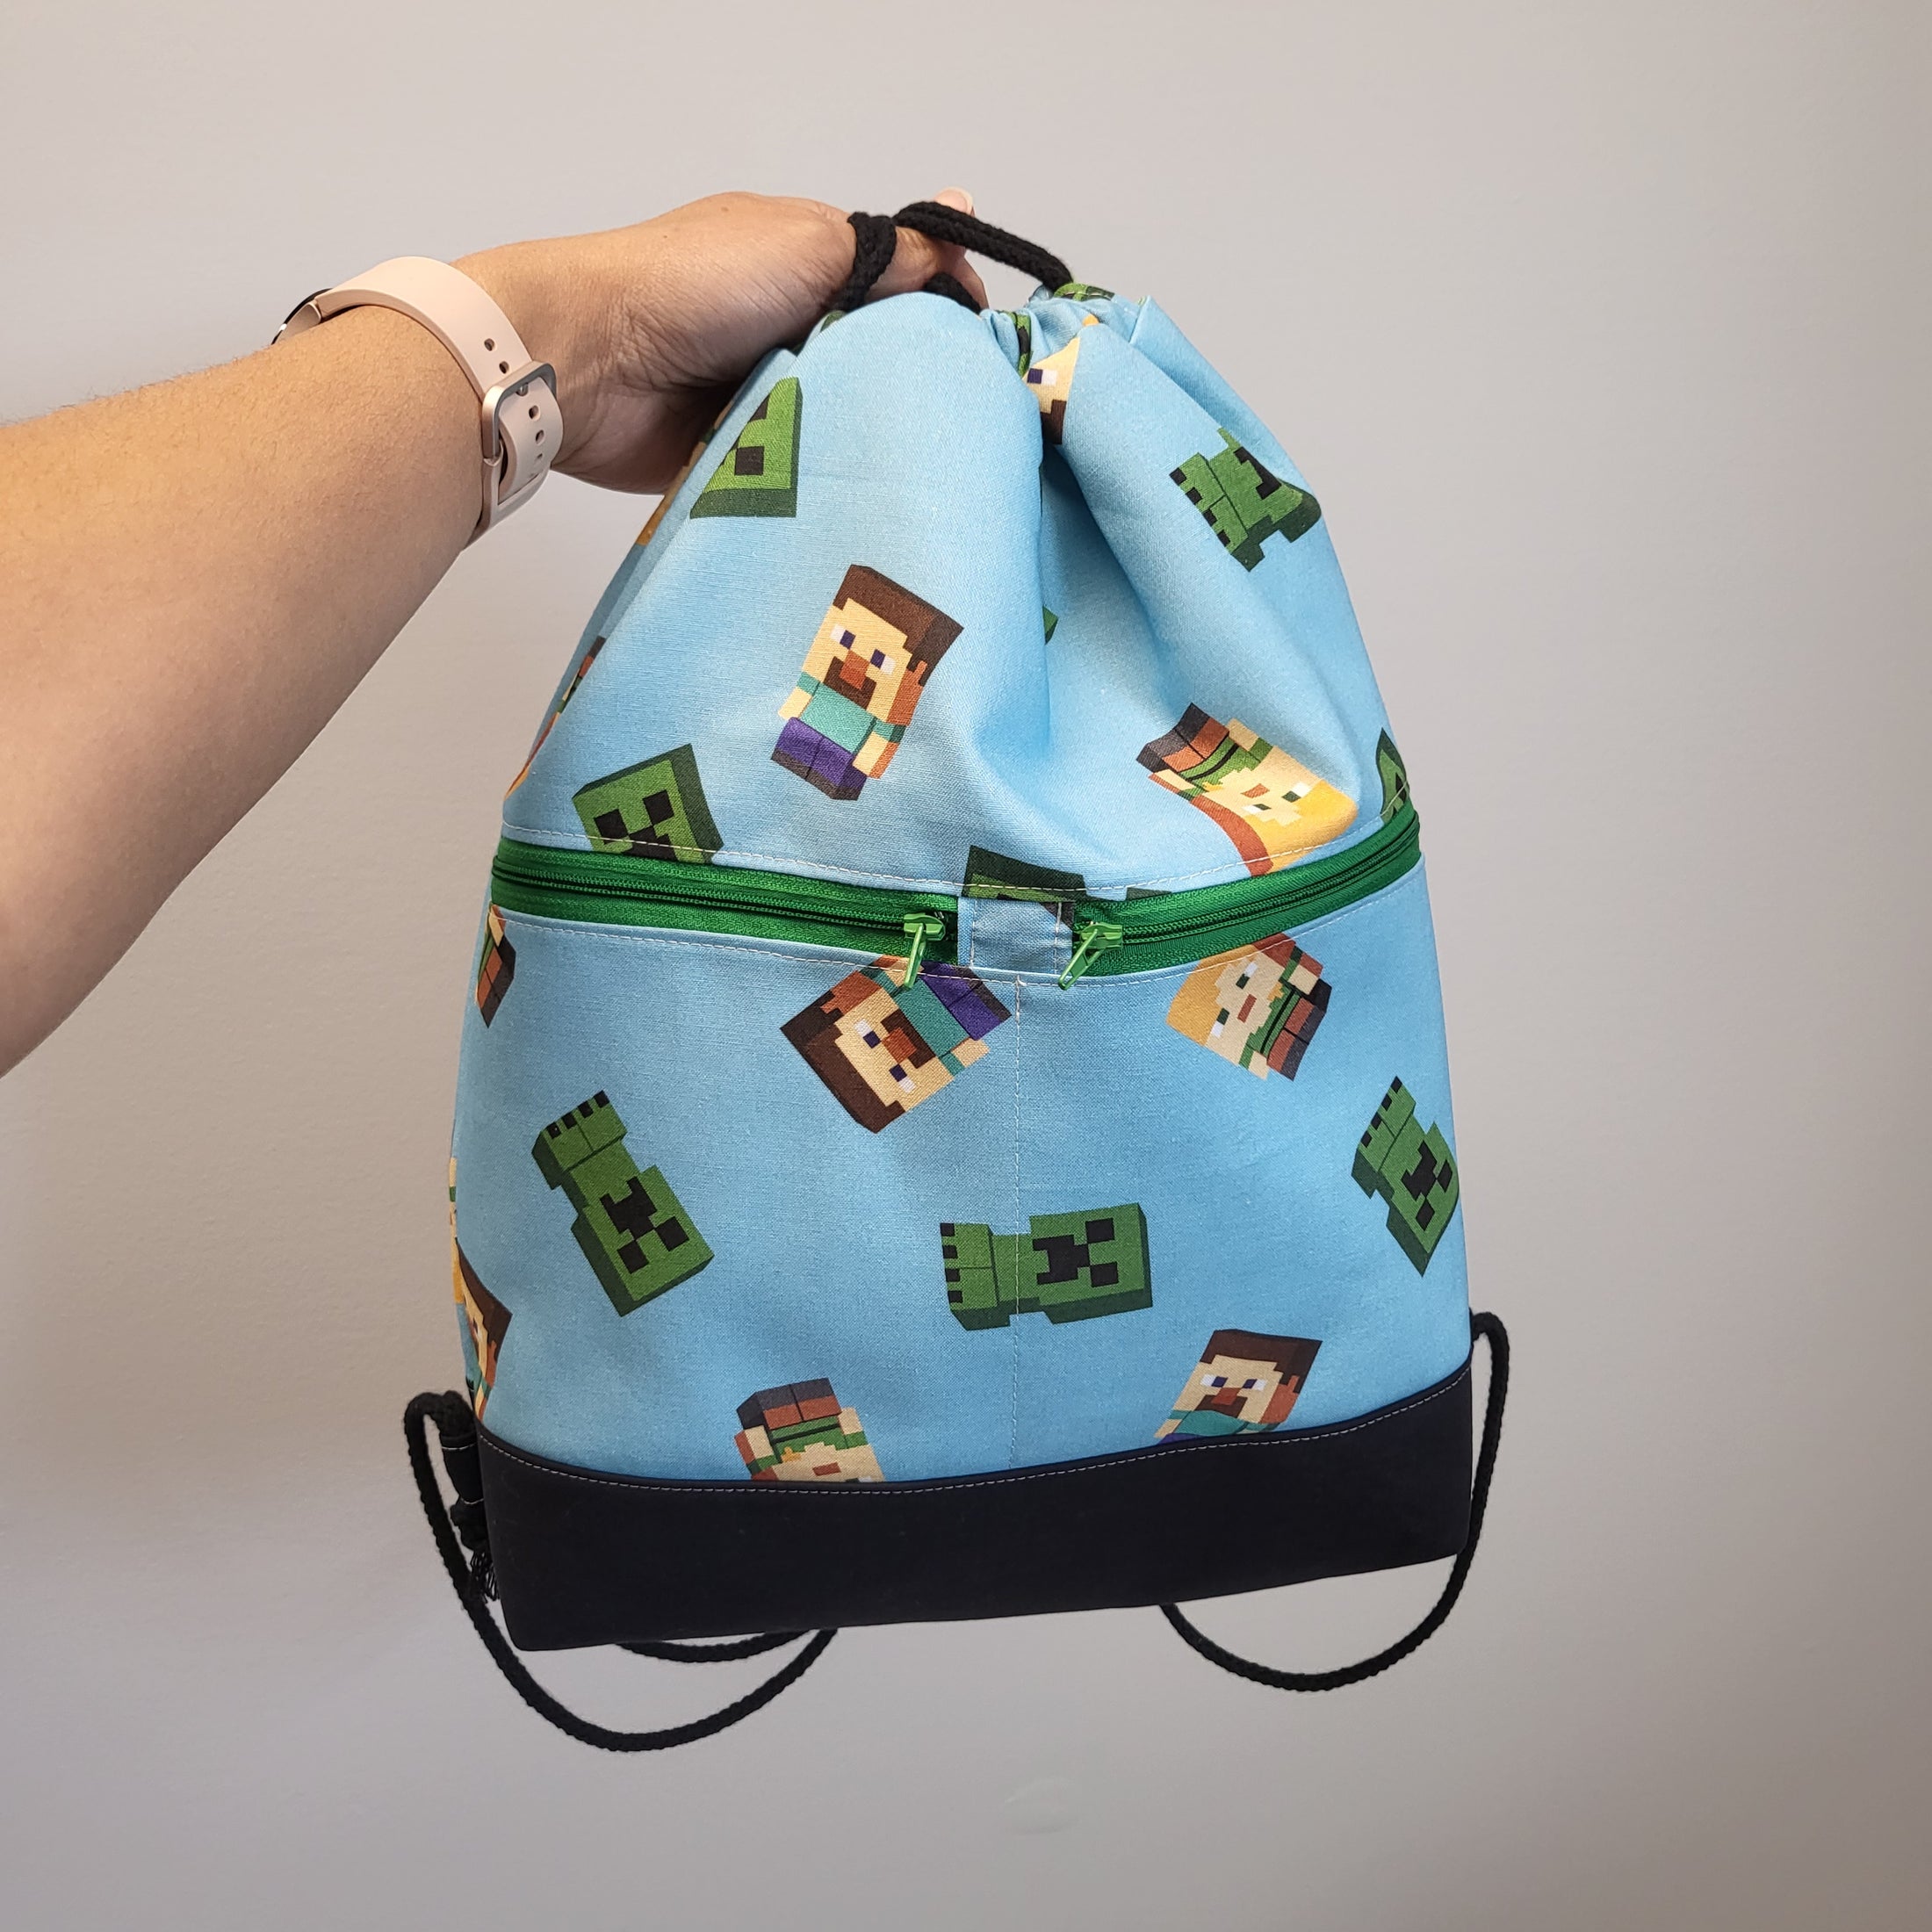 Minecraft inspired drawstring backpack with 2 exterior zipper pockets and black bottom. 